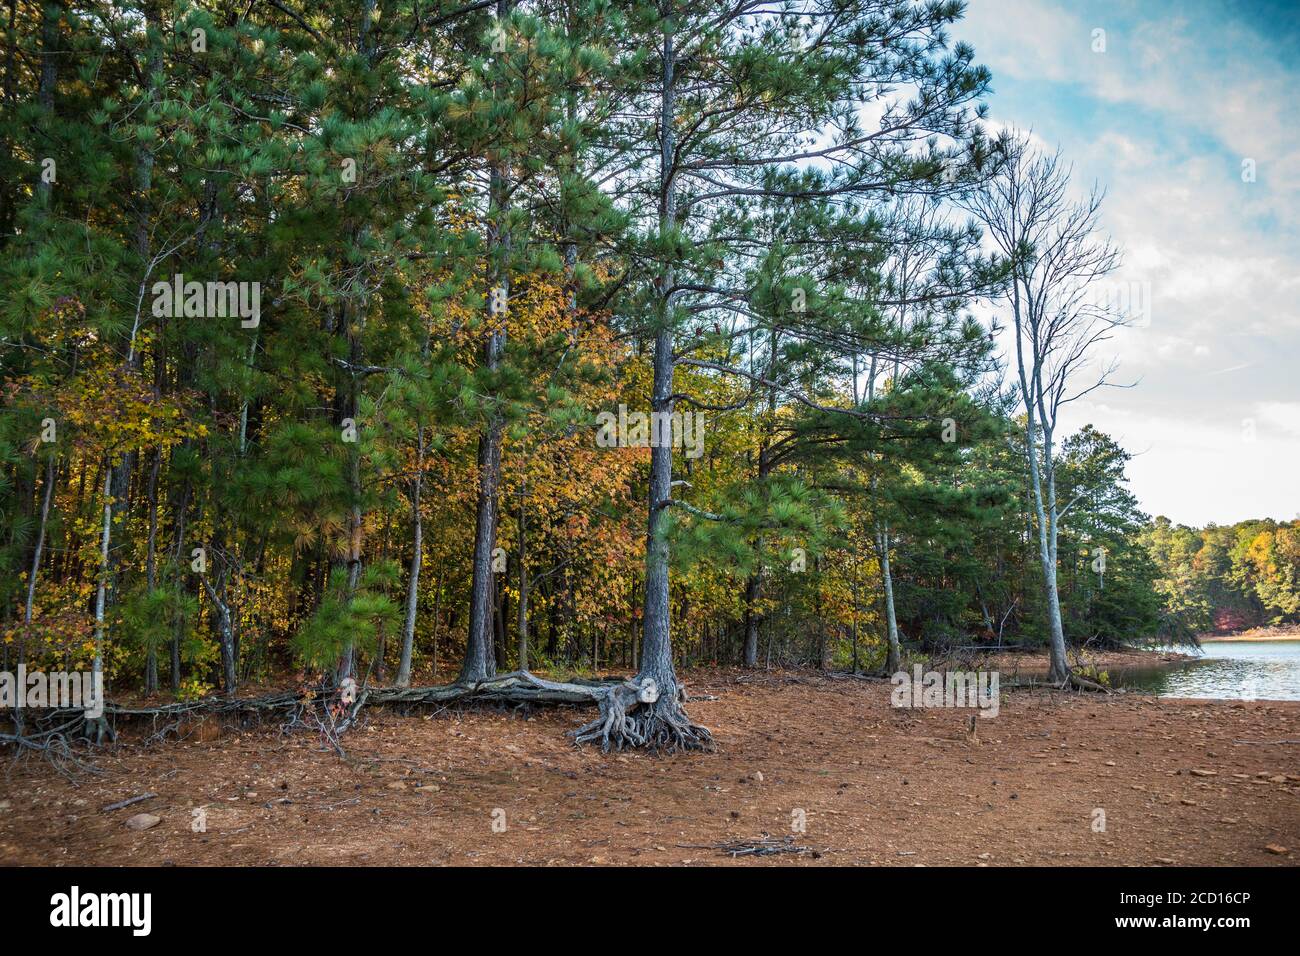 On the shoreline of Lake Lanier Georgia in autumn with the tree roots exposed from erosion and the trees turning colorful in autumn with the sunshine Stock Photo